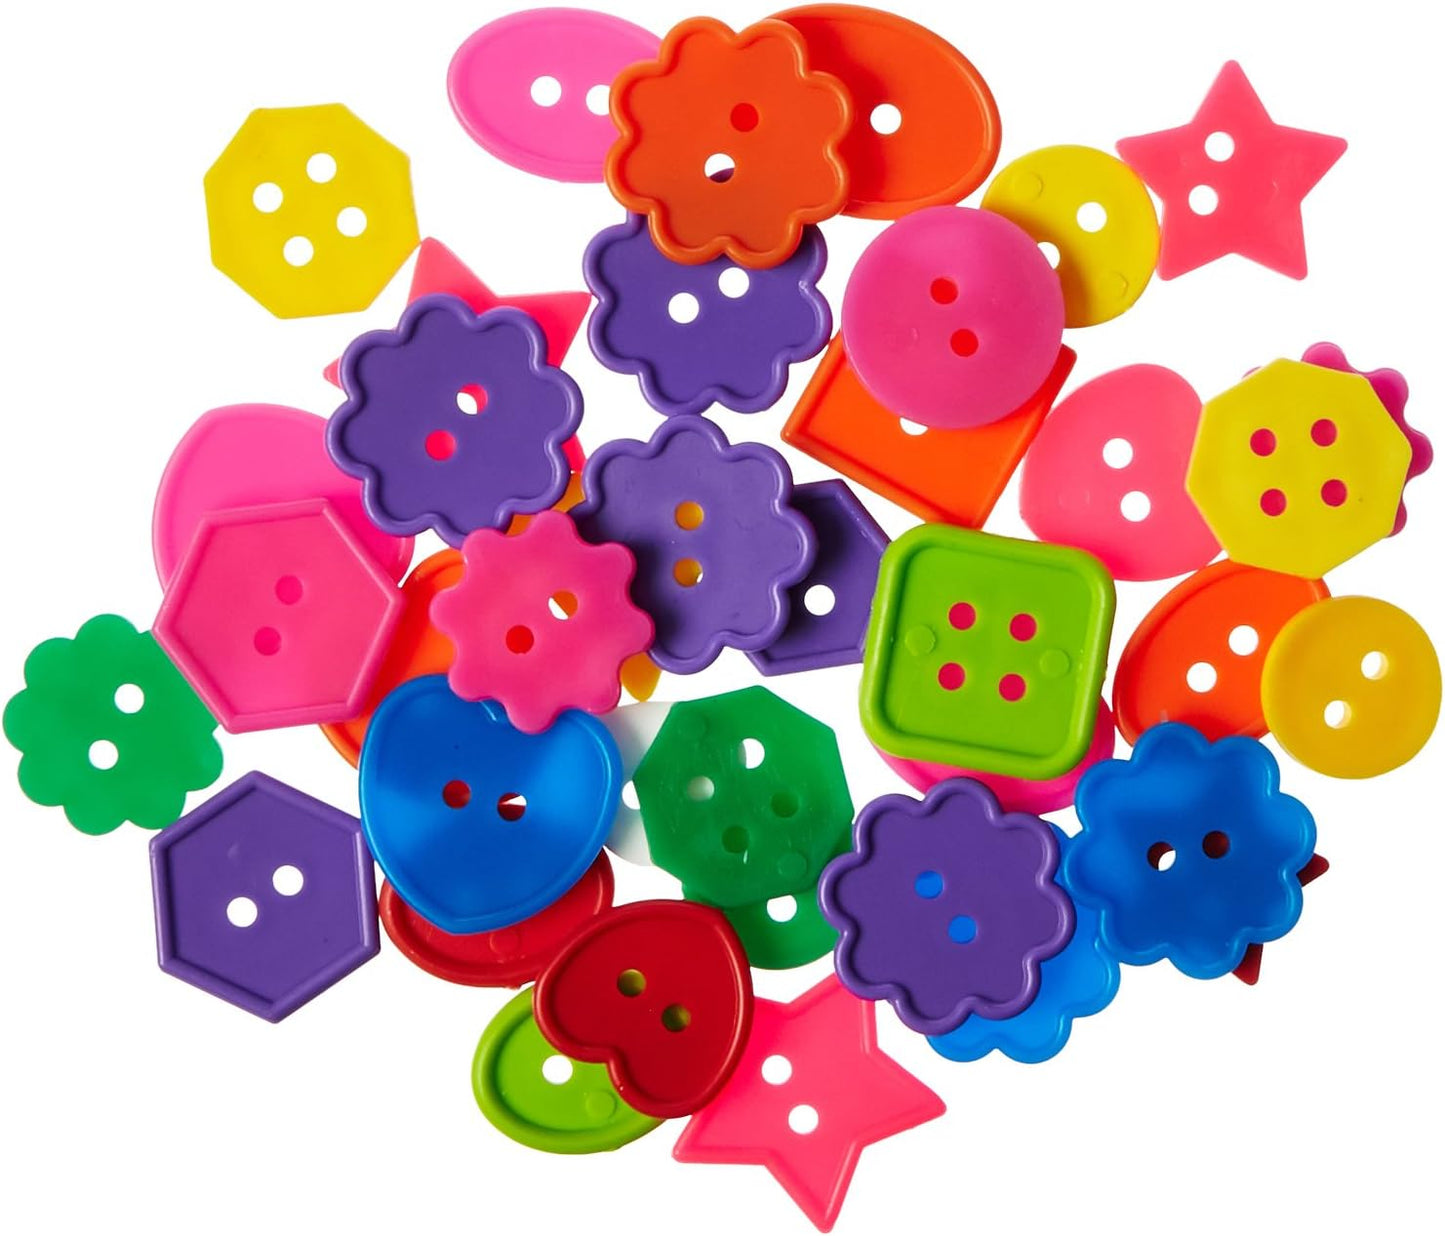 Roylco Bright Buttons, Assorted Sizes, Shapes and Color #R2132, 1 lb